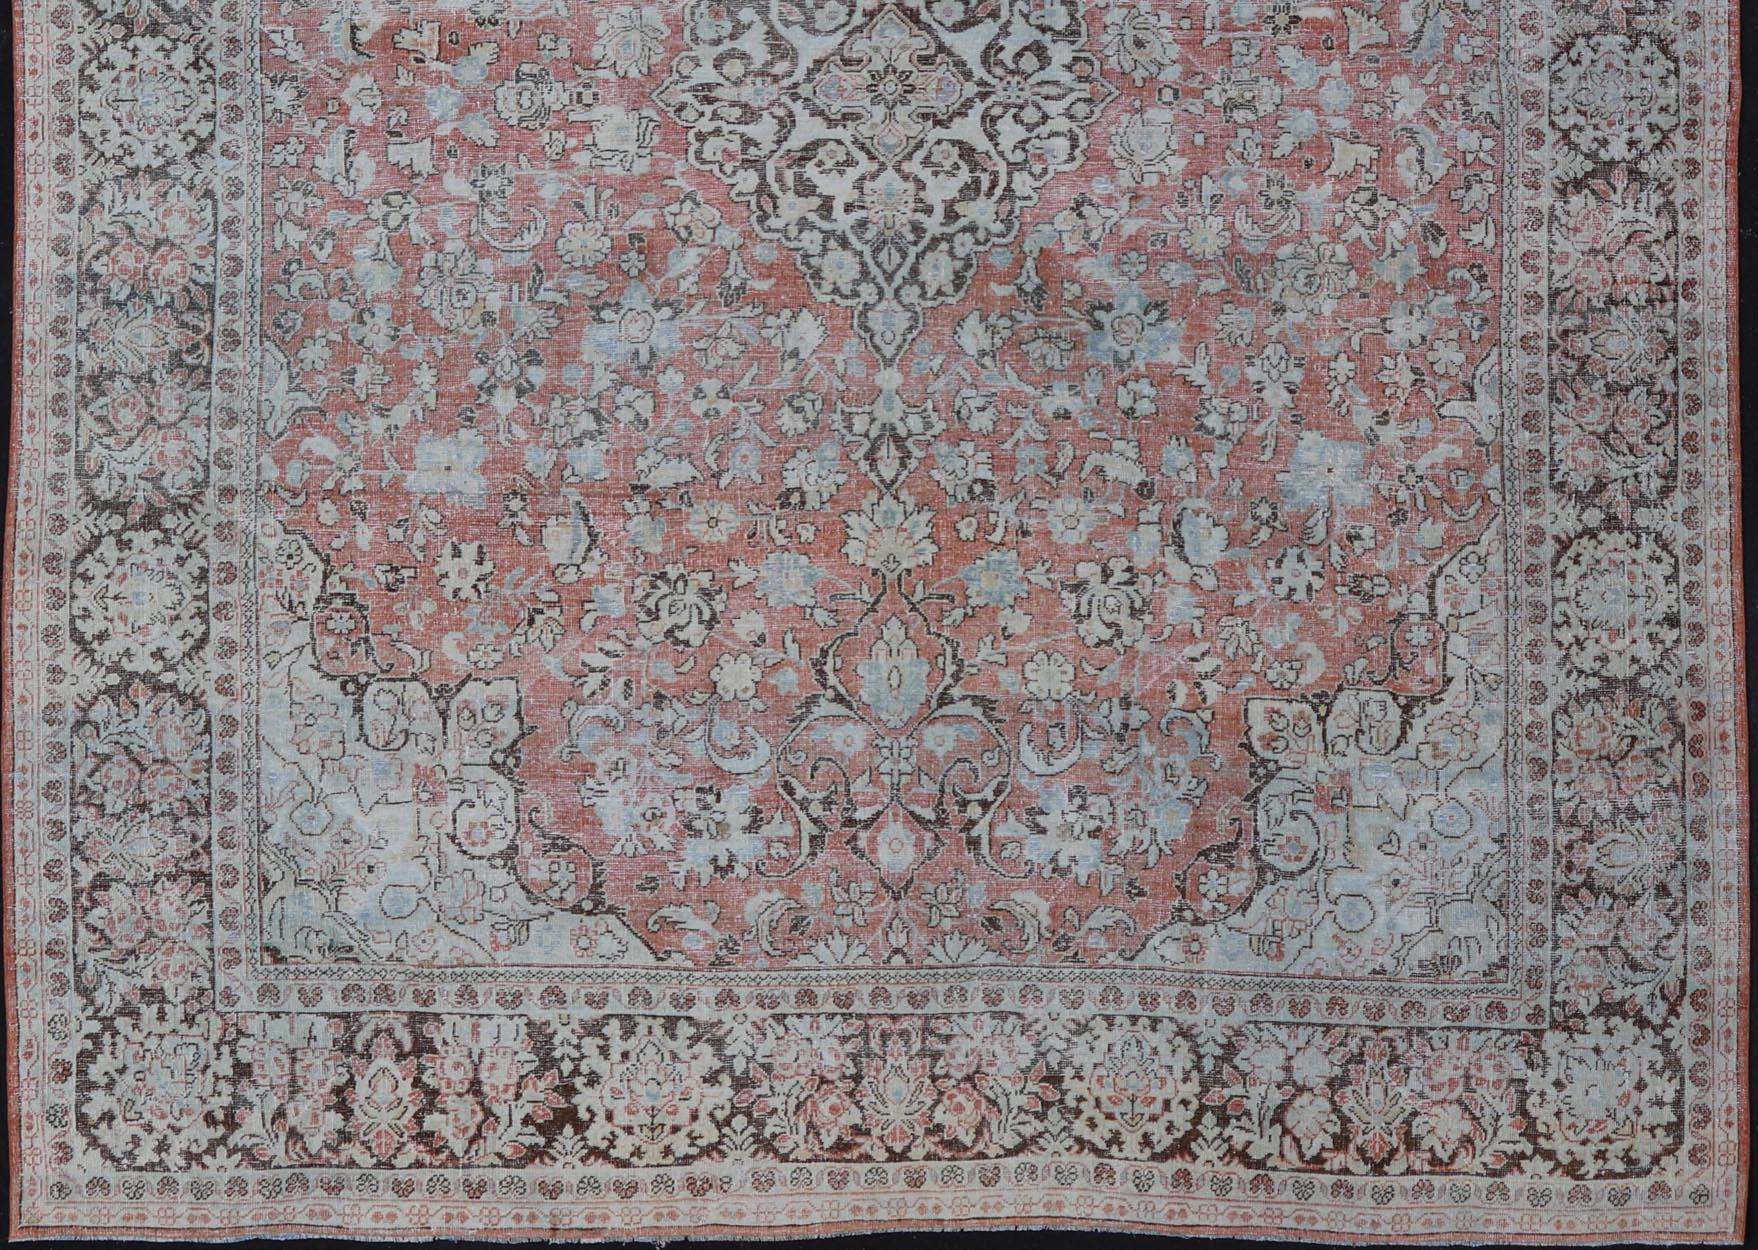 Distressed Antique Medallion Persian Mahal Rug in Faded Orange, Cream and Brown In Good Condition For Sale In Atlanta, GA